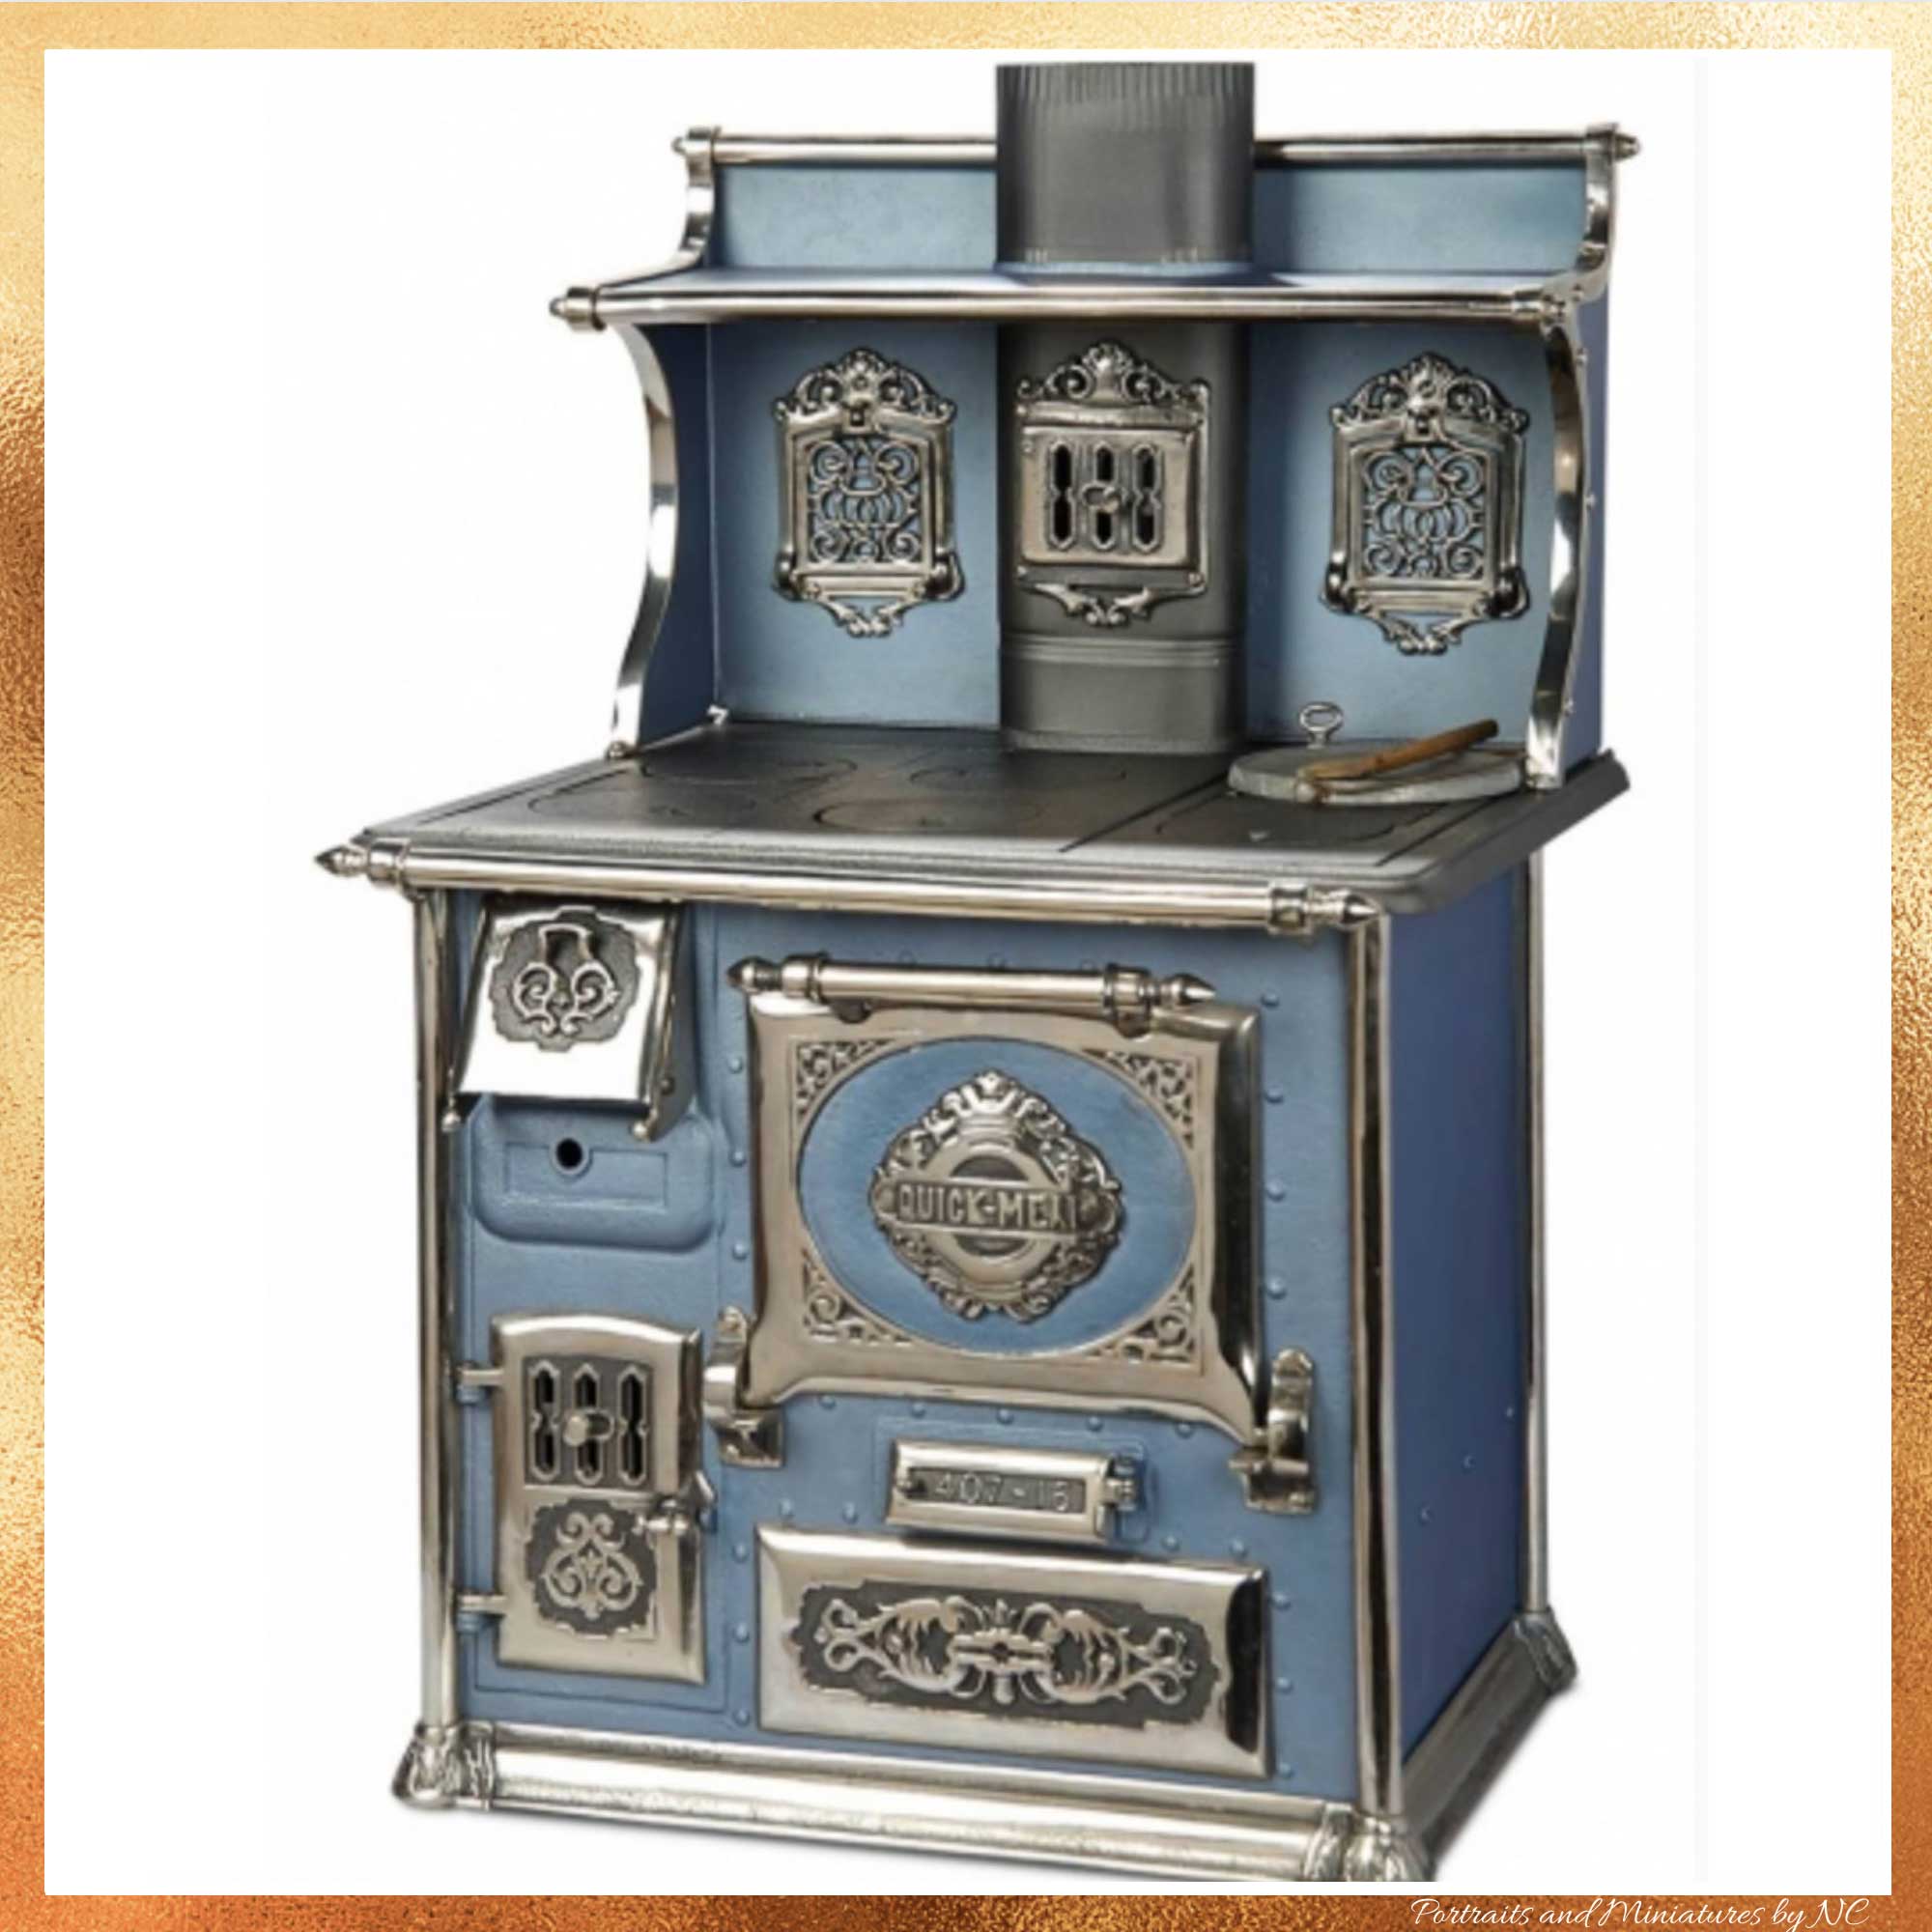 RARE AMERICAN BLUE ENAMEL WARE AND NICKEL STOVE "QUICK MEAL"